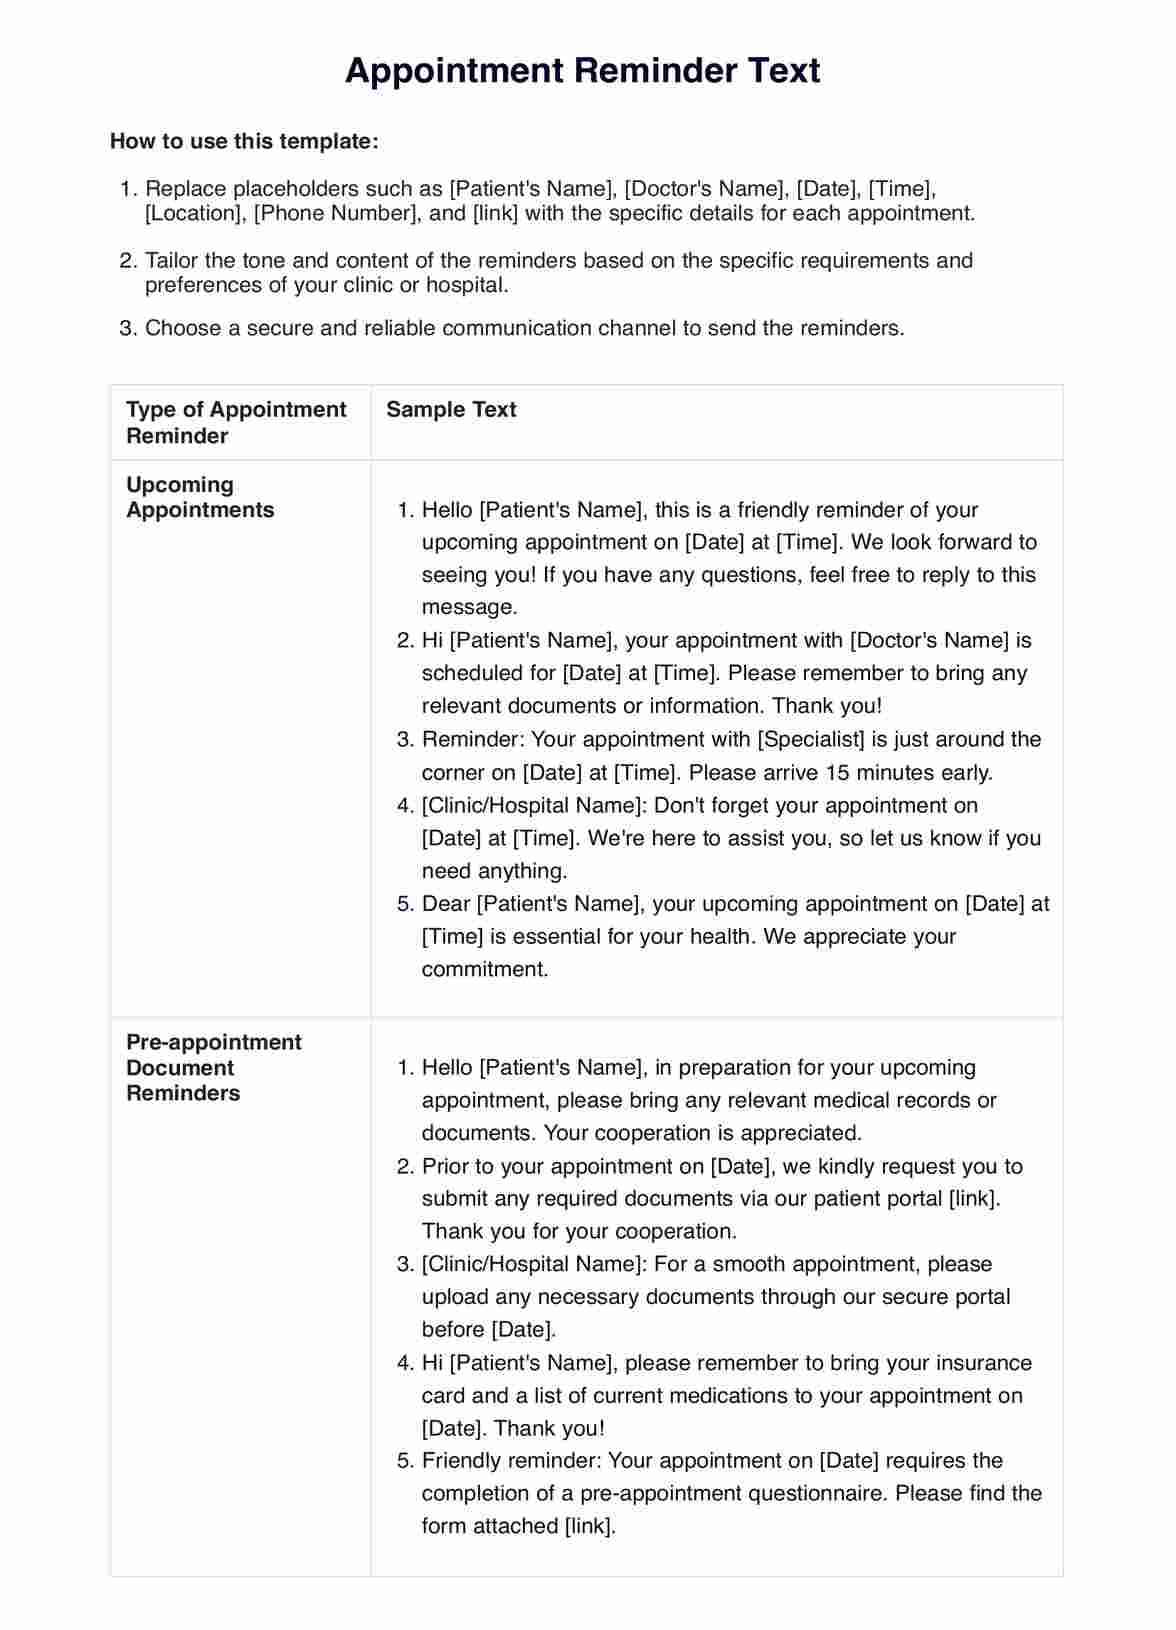 Appointment Reminder Text PDF Example